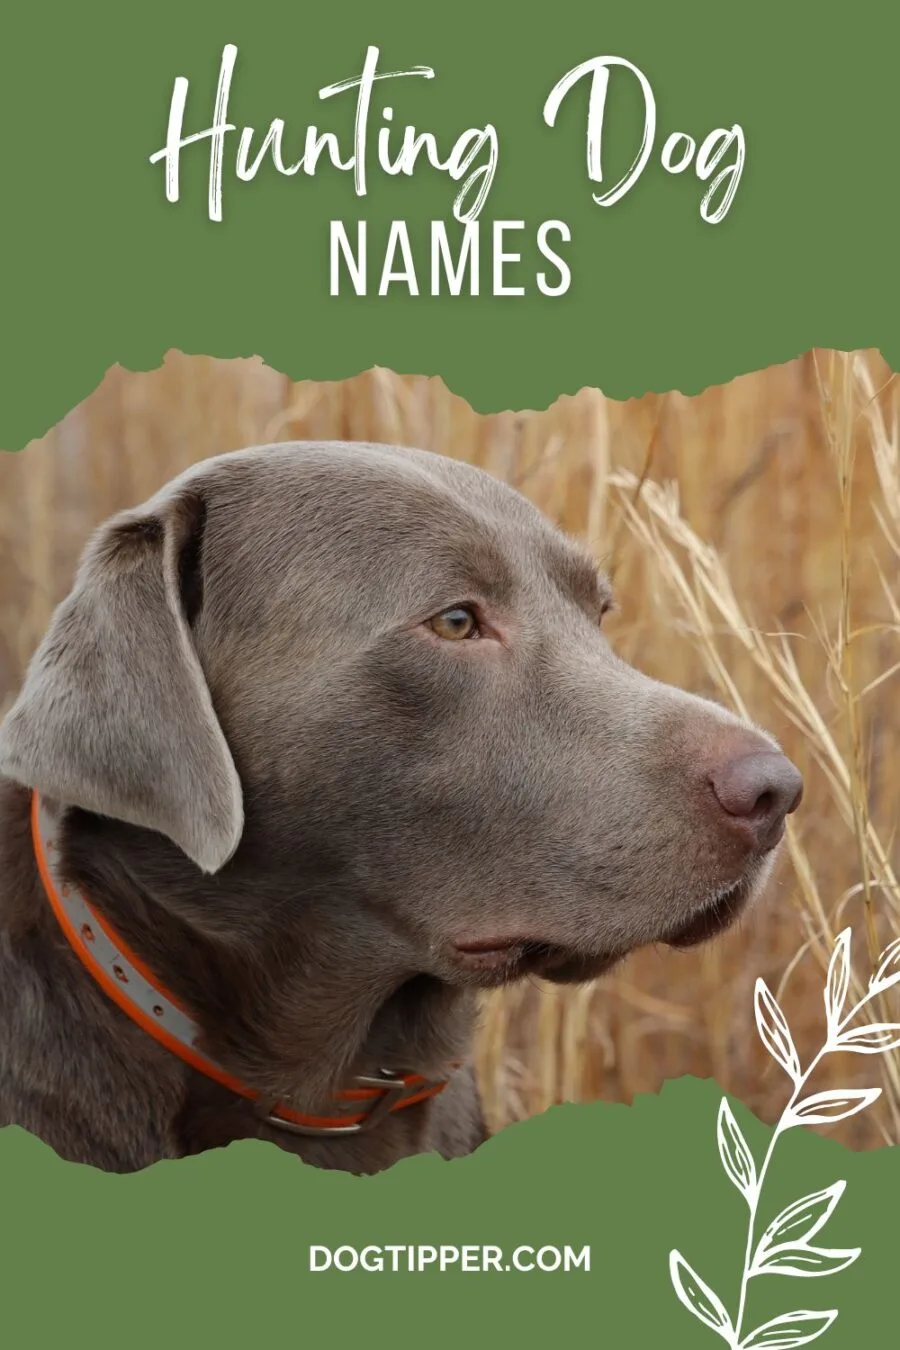 Hunting Dog Names for Hunting Breeds and Sporting Dogs